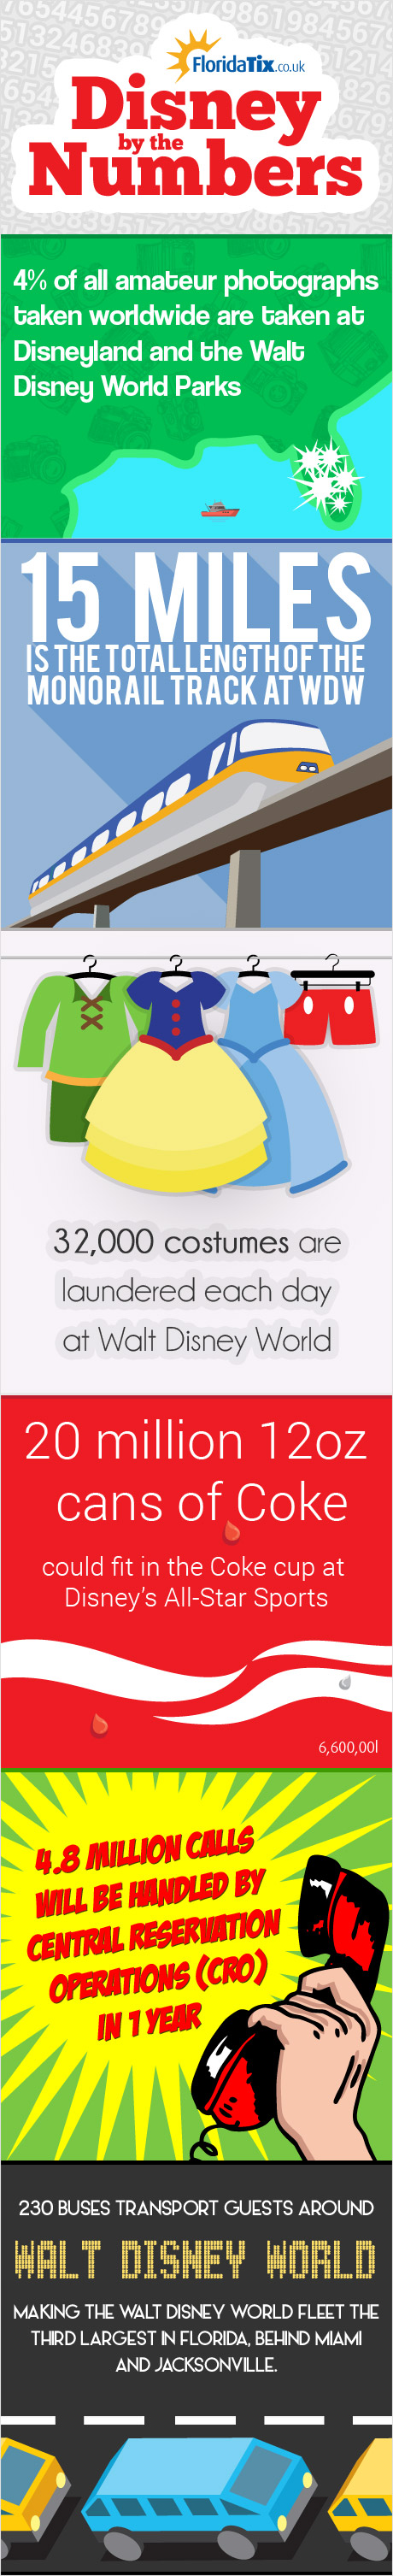 Disney World by Numbers